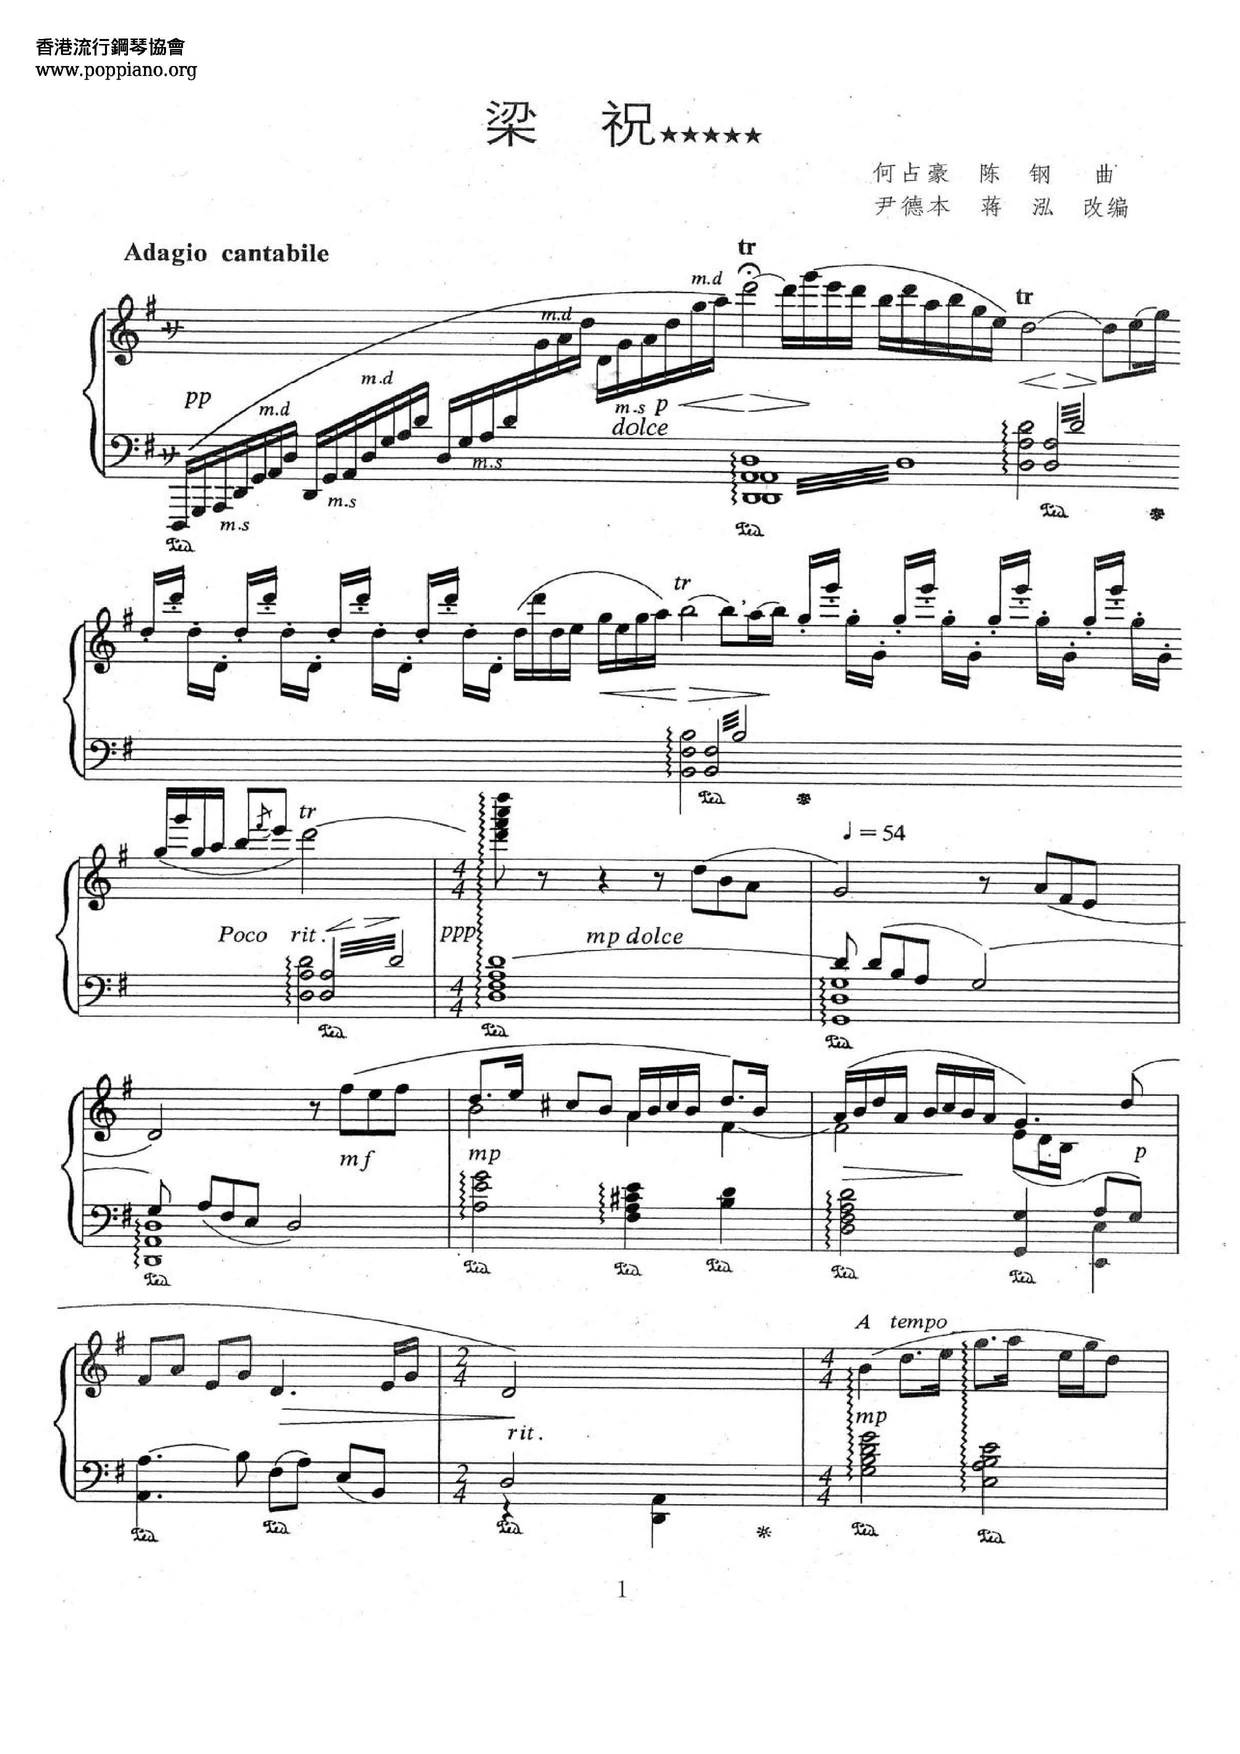 Violin Concerto The Butterfly Lovers Score